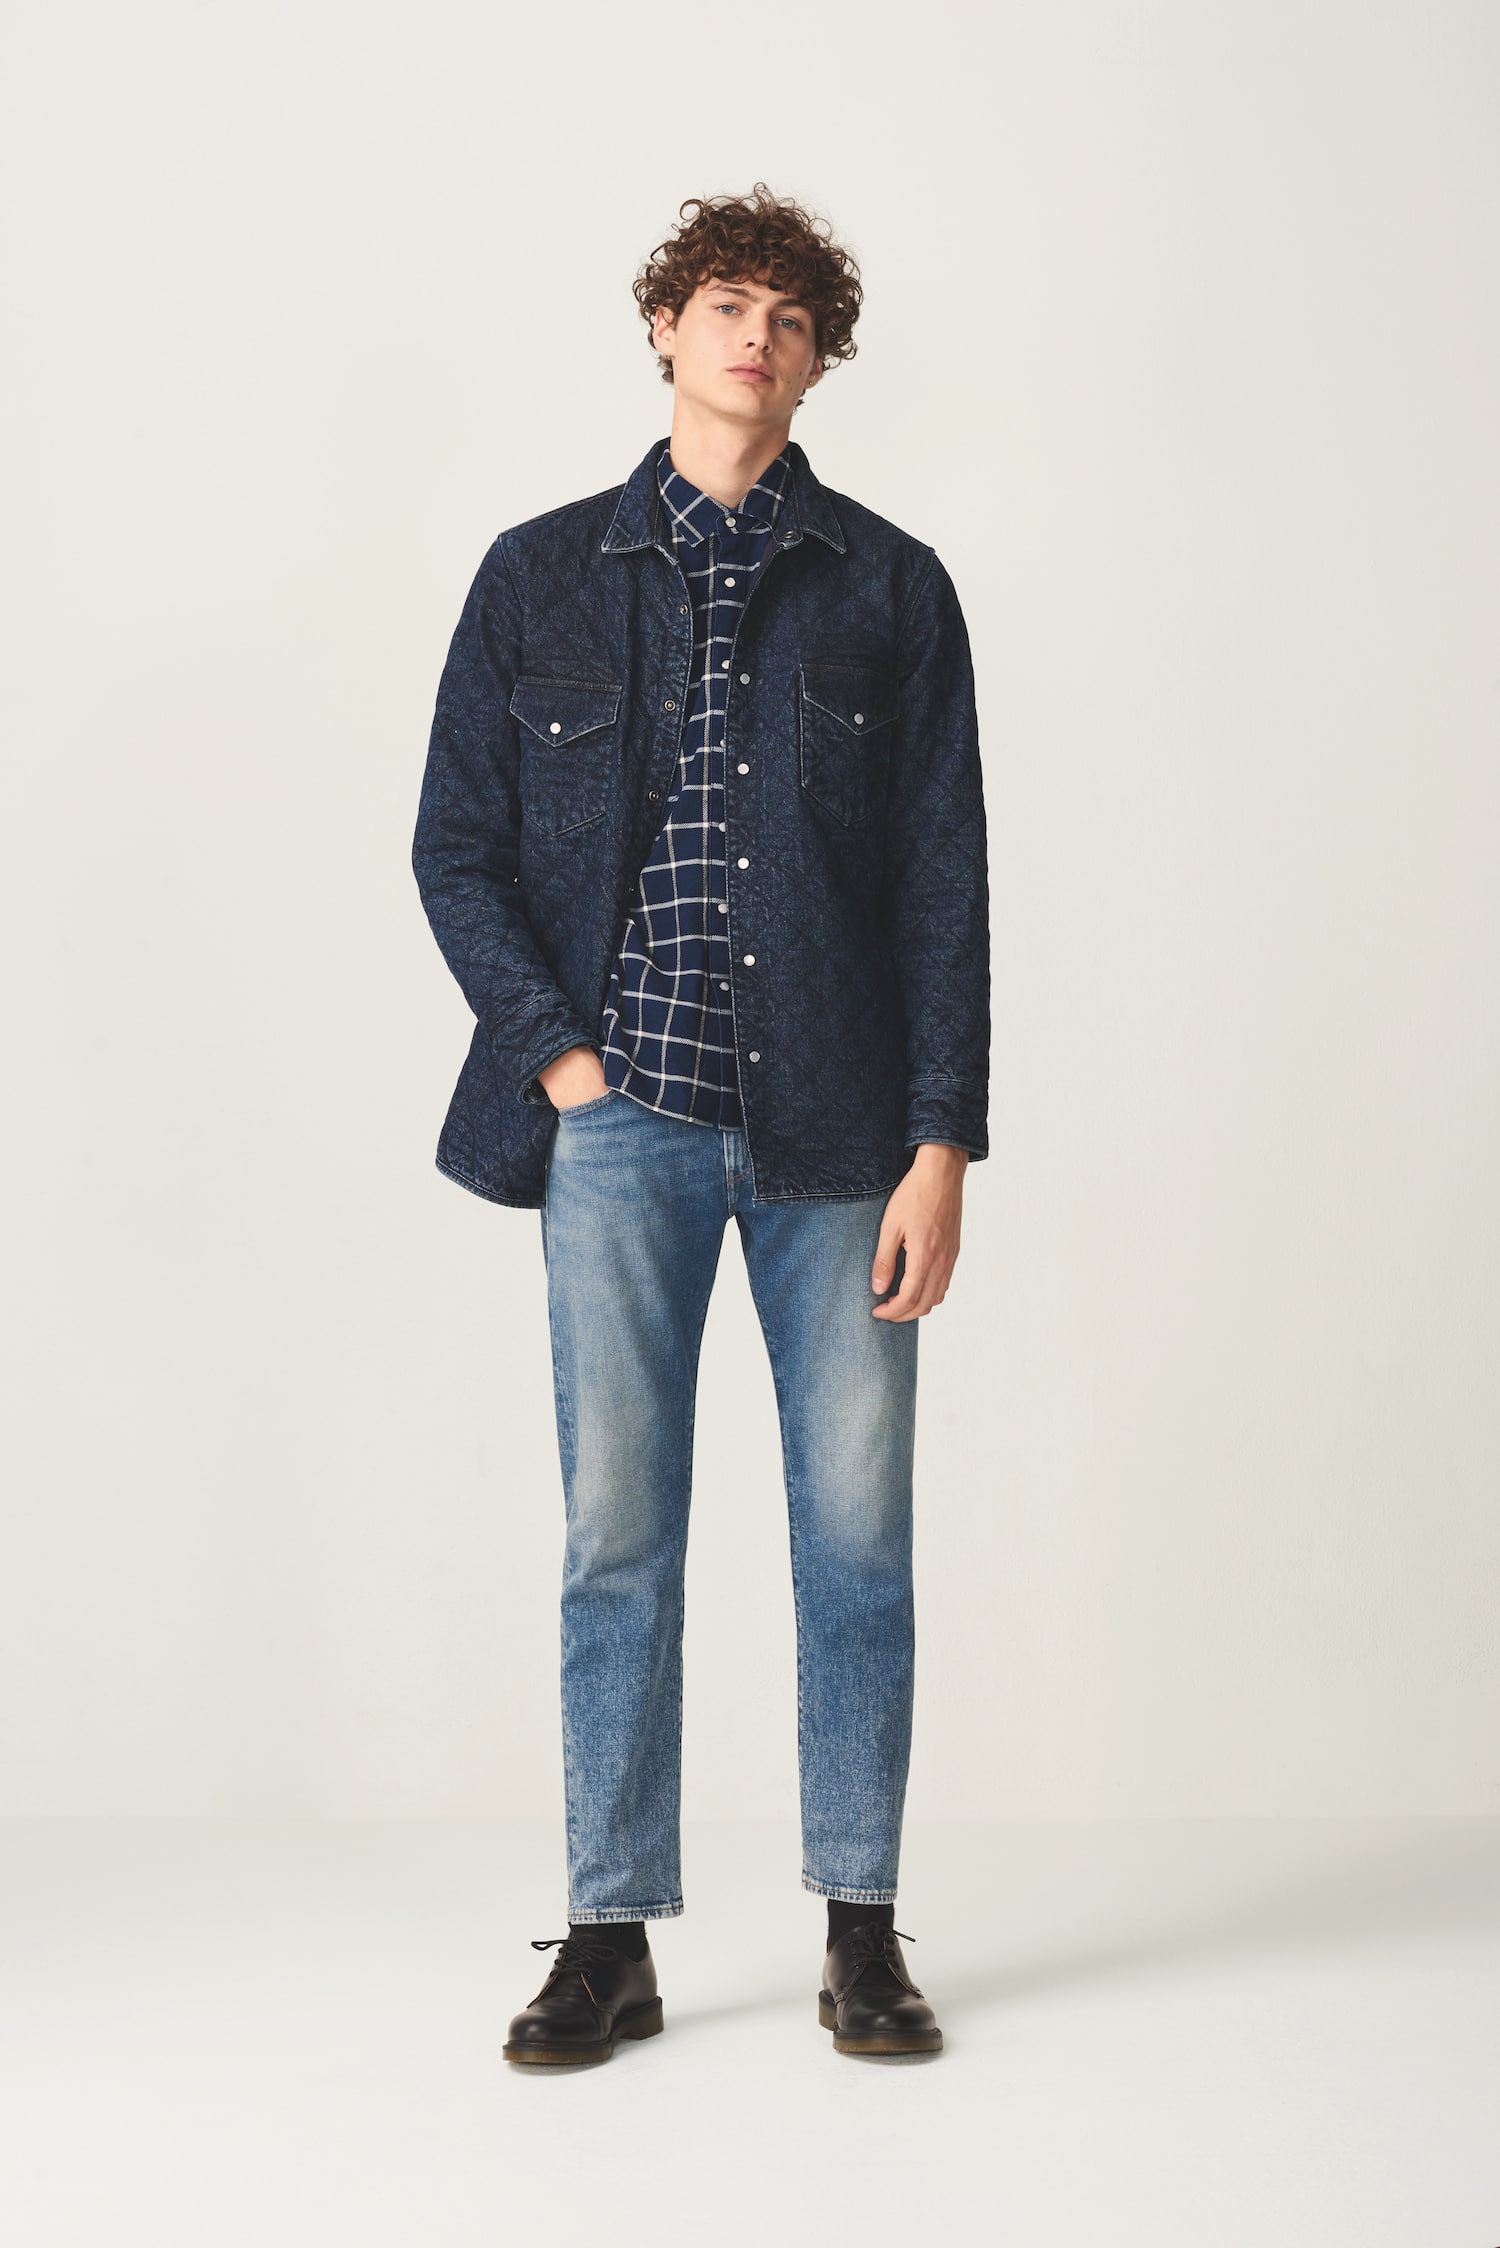 lookbook levis made crafted fw19 23